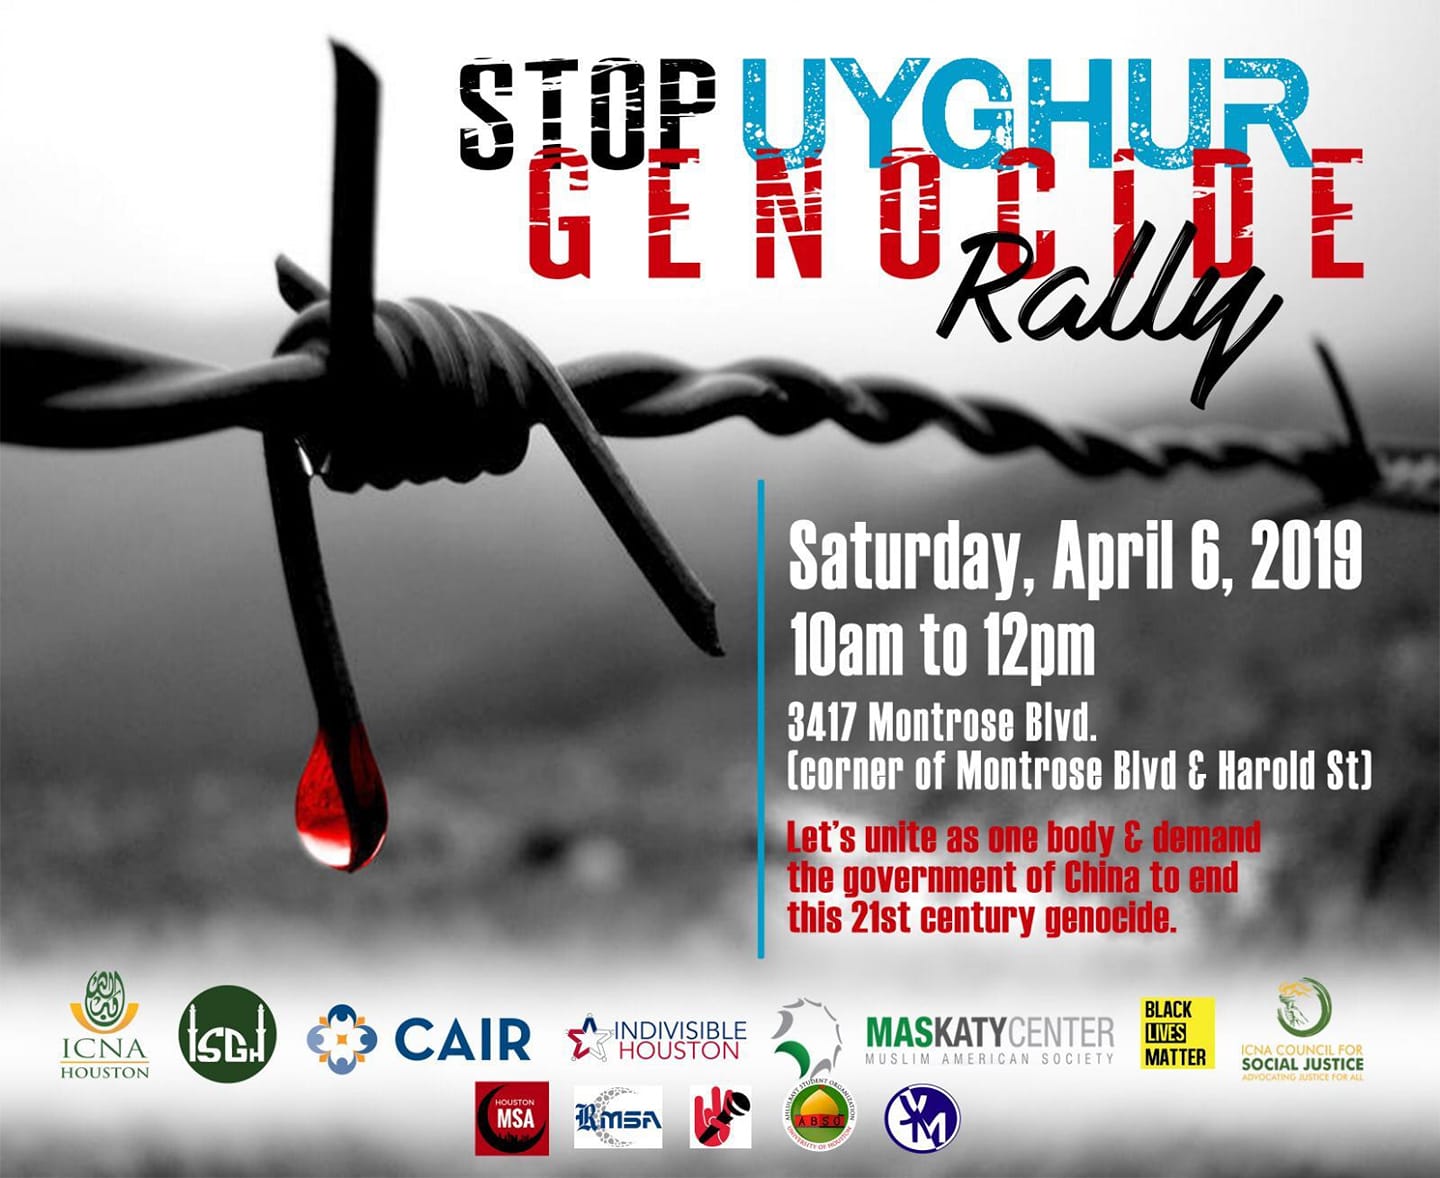 Rally to Stop the Uyghur Genocide